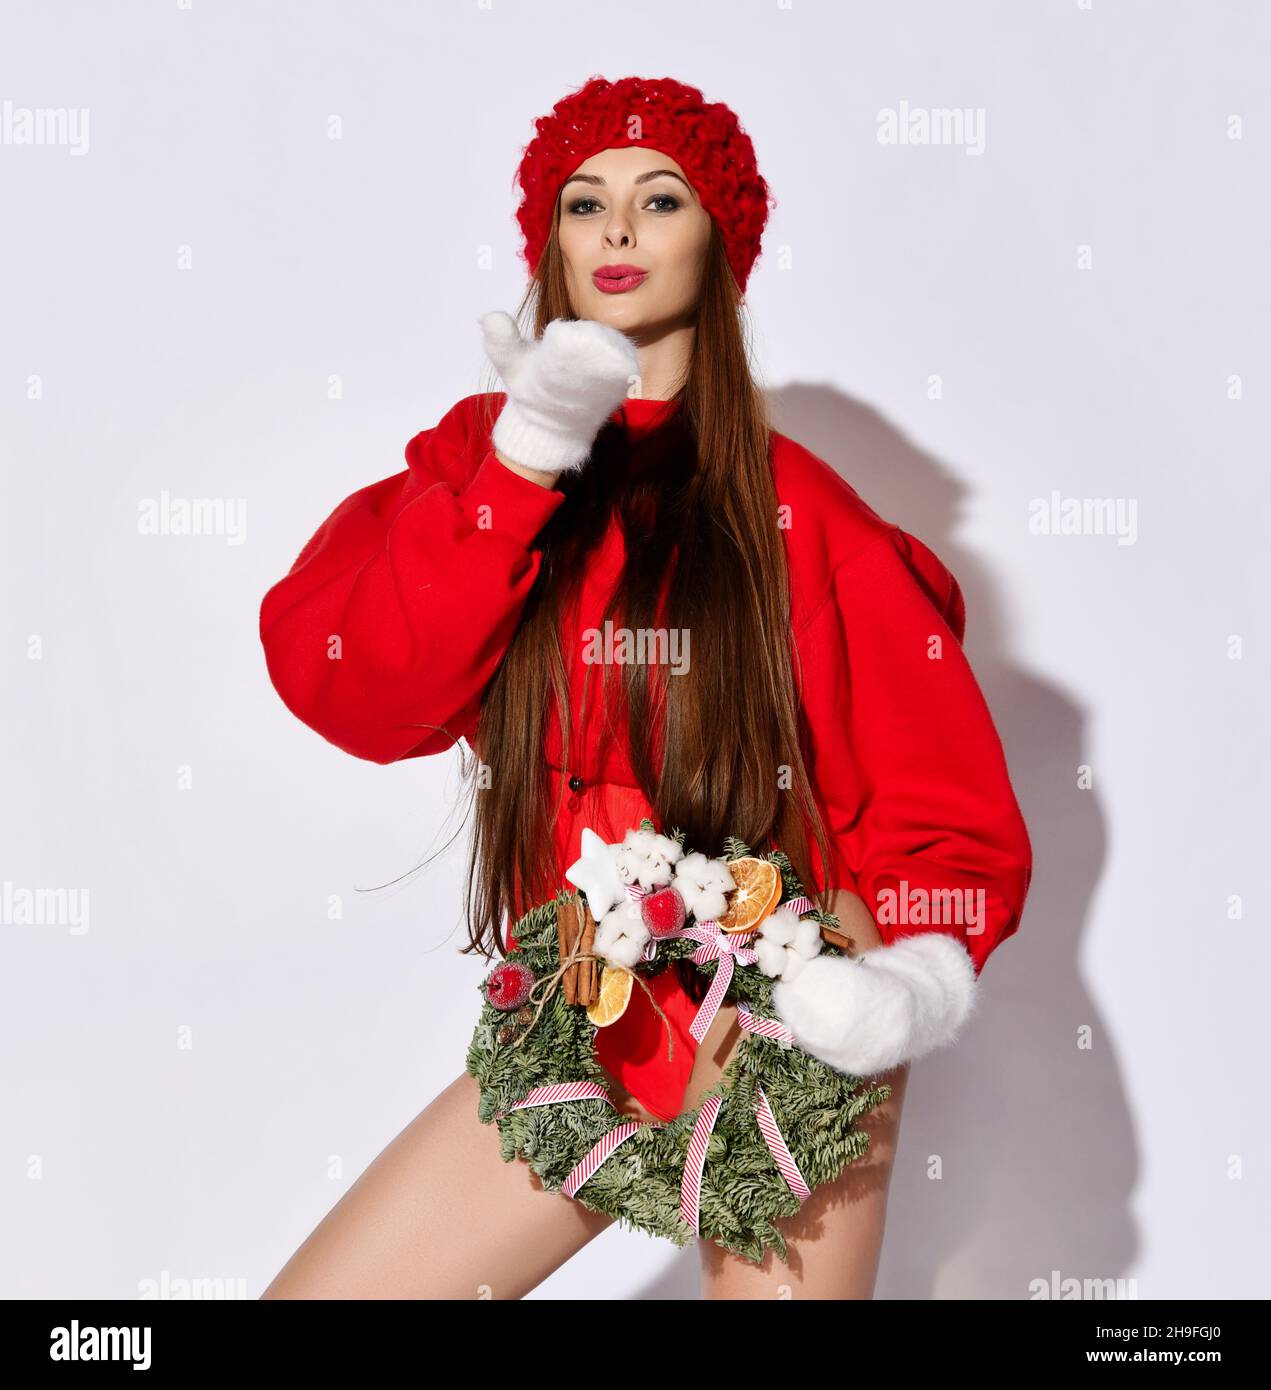 Cheerful girl in red short top sweater, bodysuit, hat and mittens with decorated Christmas wreath in hand sends a kiss Stock Photo